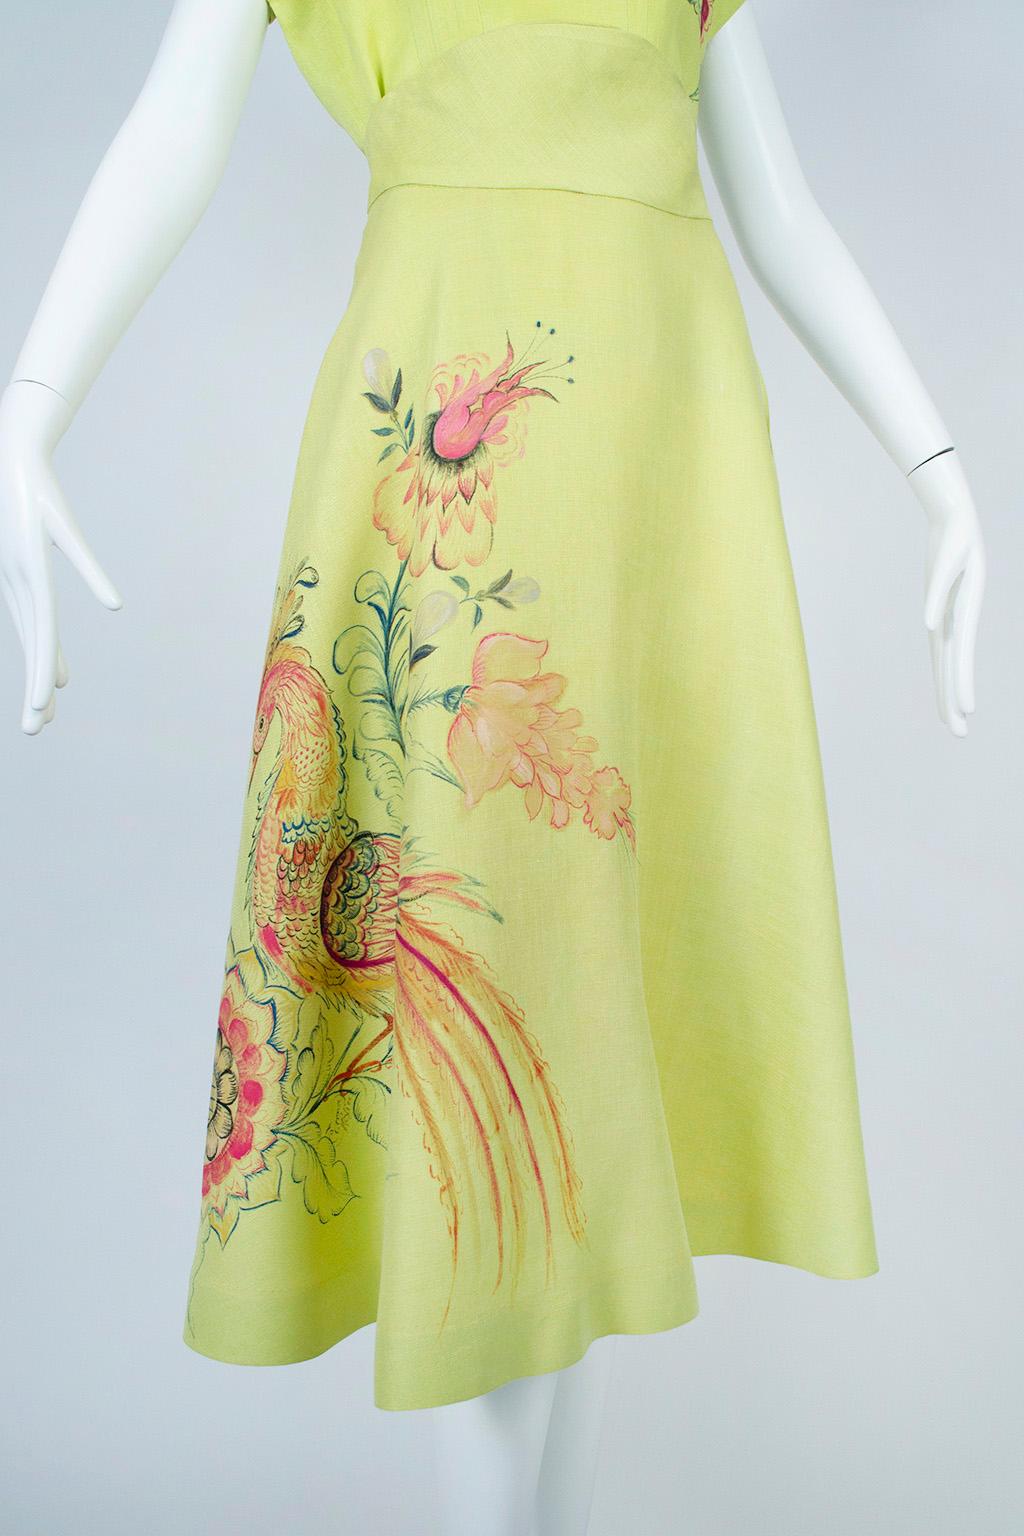 Bespoke Lime Hand-Painted Salvador Corona Peacock Skirt and Top, Mexico-M, 1950s For Sale 5